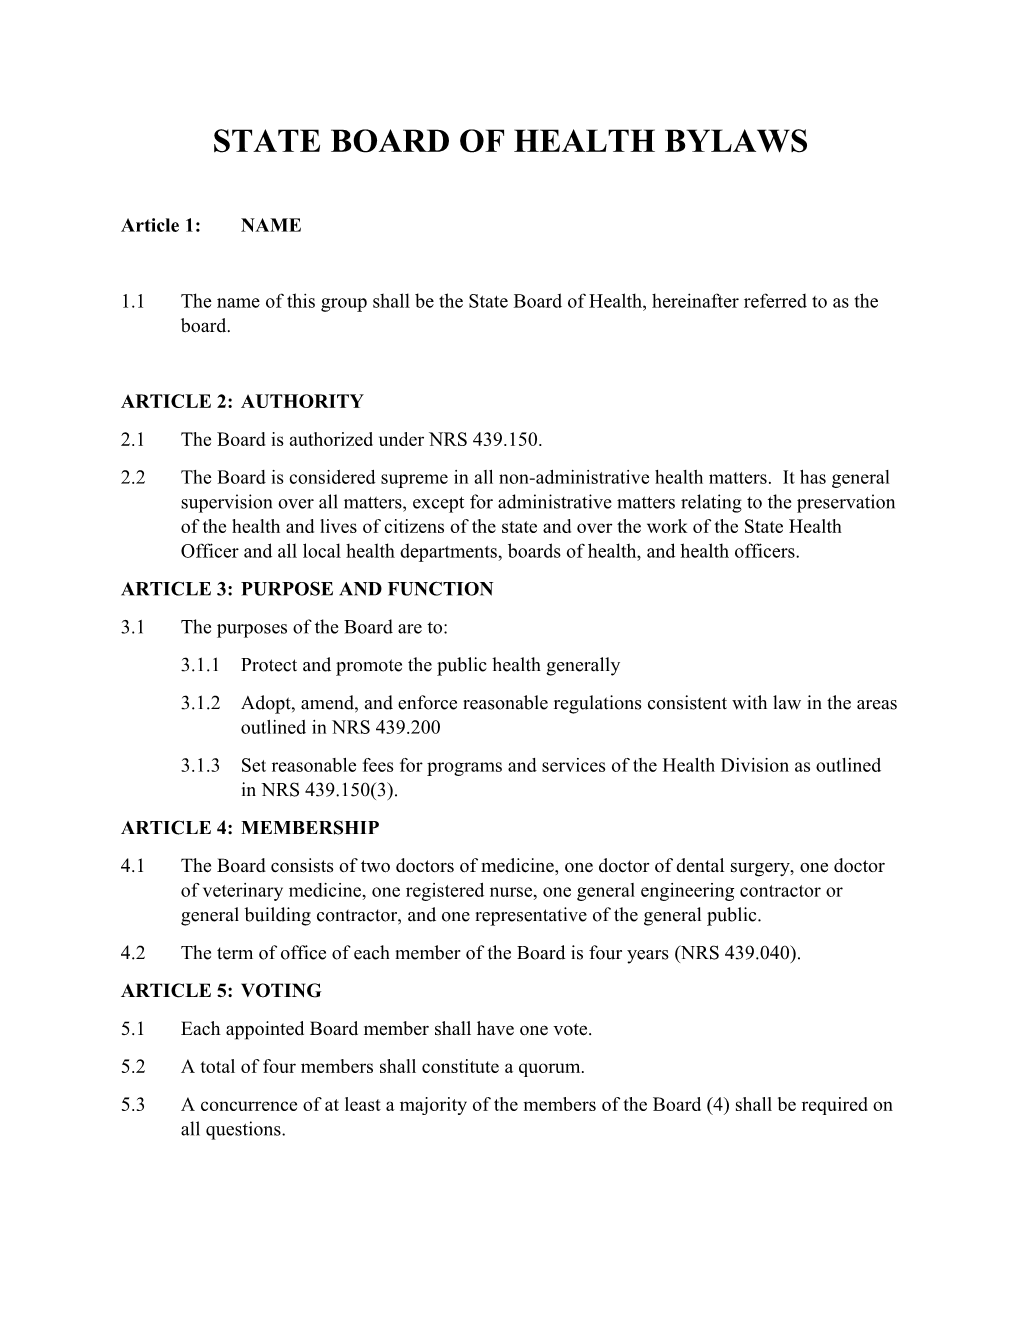 State Board of Health Bylaws